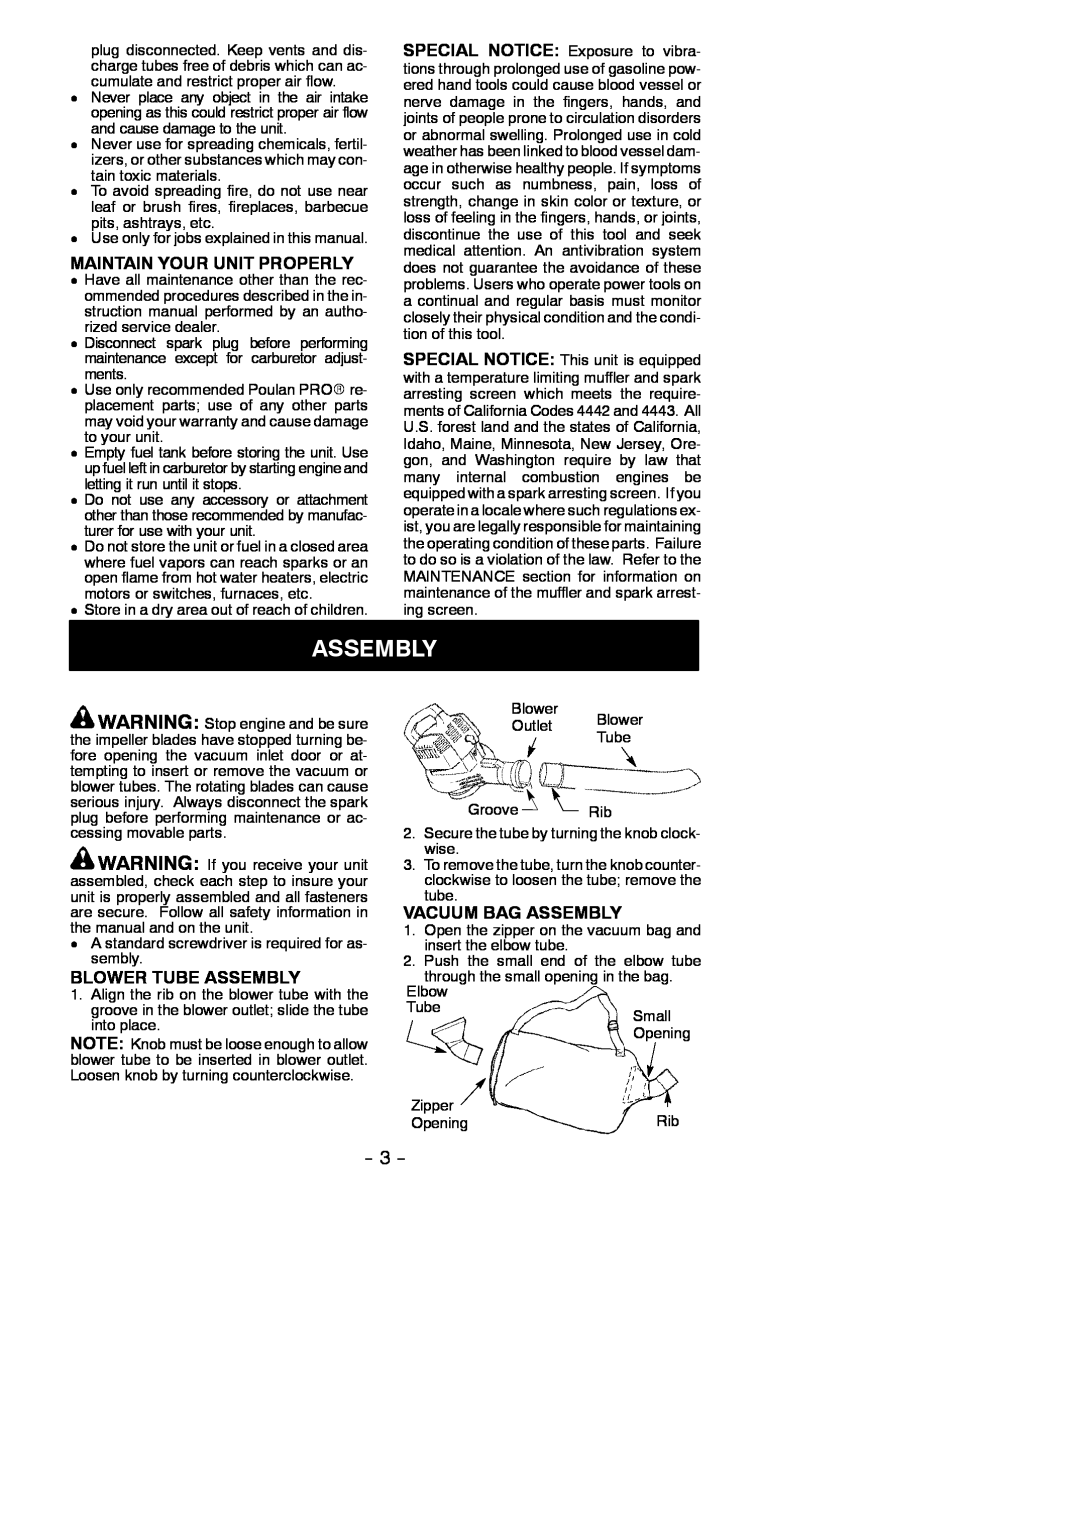 Poulan 530165213 instruction manual Maintain Your Unit Properly, Blower Tube Assembly, Vacuum Bag Assembly 